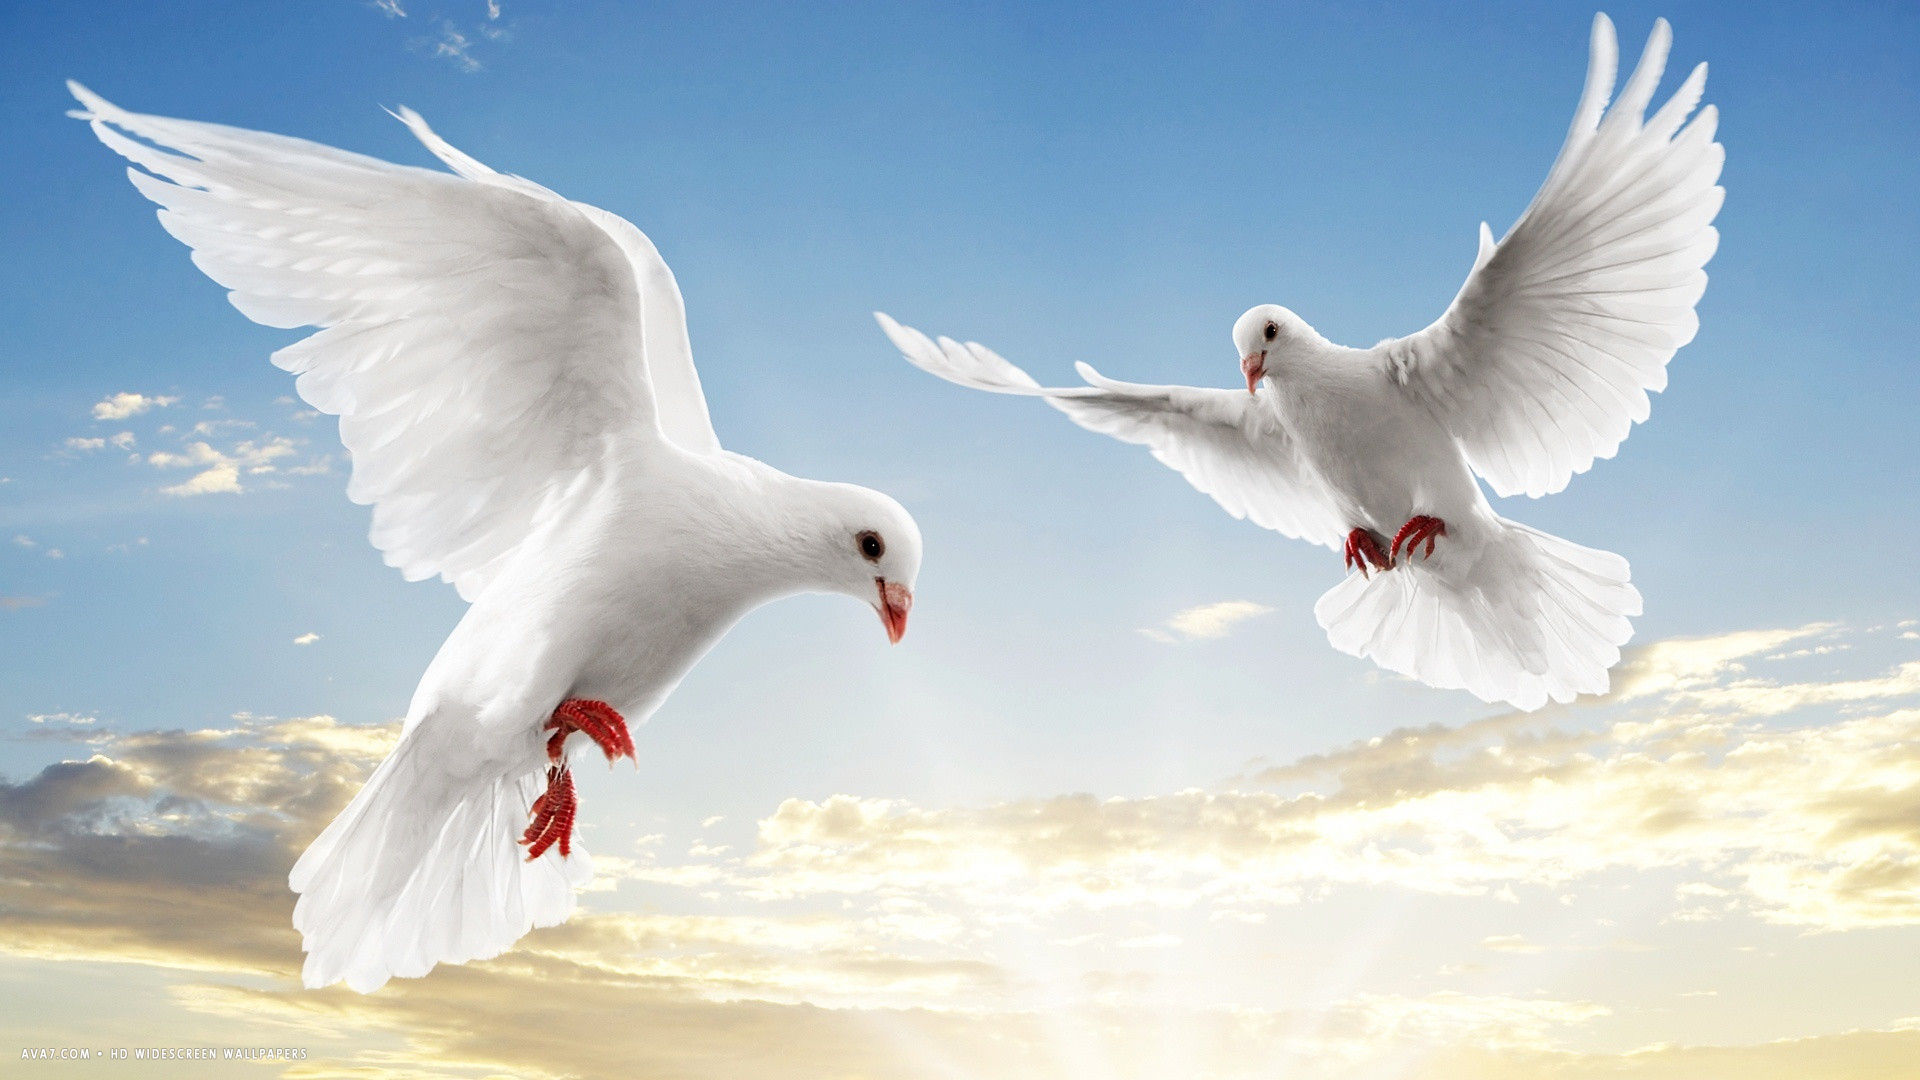 dove white doves bird flying sky sunset clouds hd widescreen ...